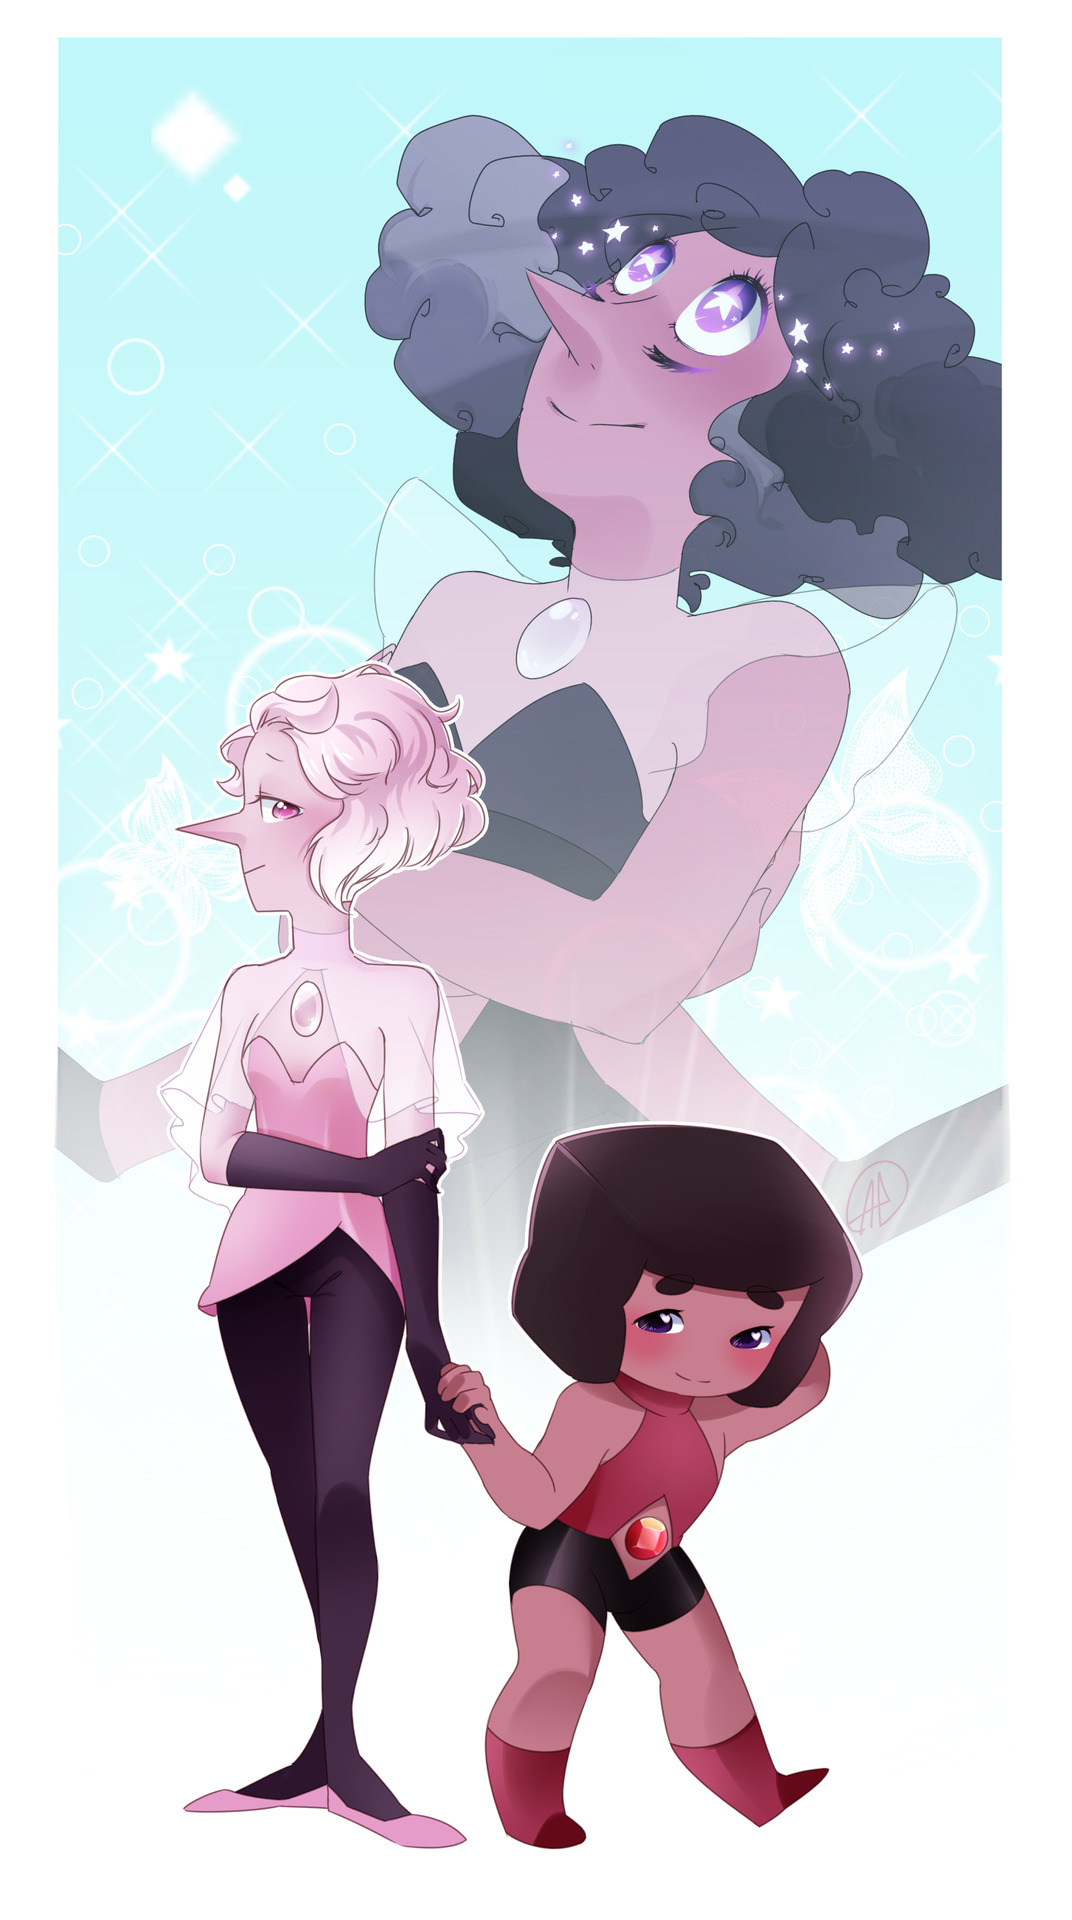 Rhodonite, i’d like to see her more!